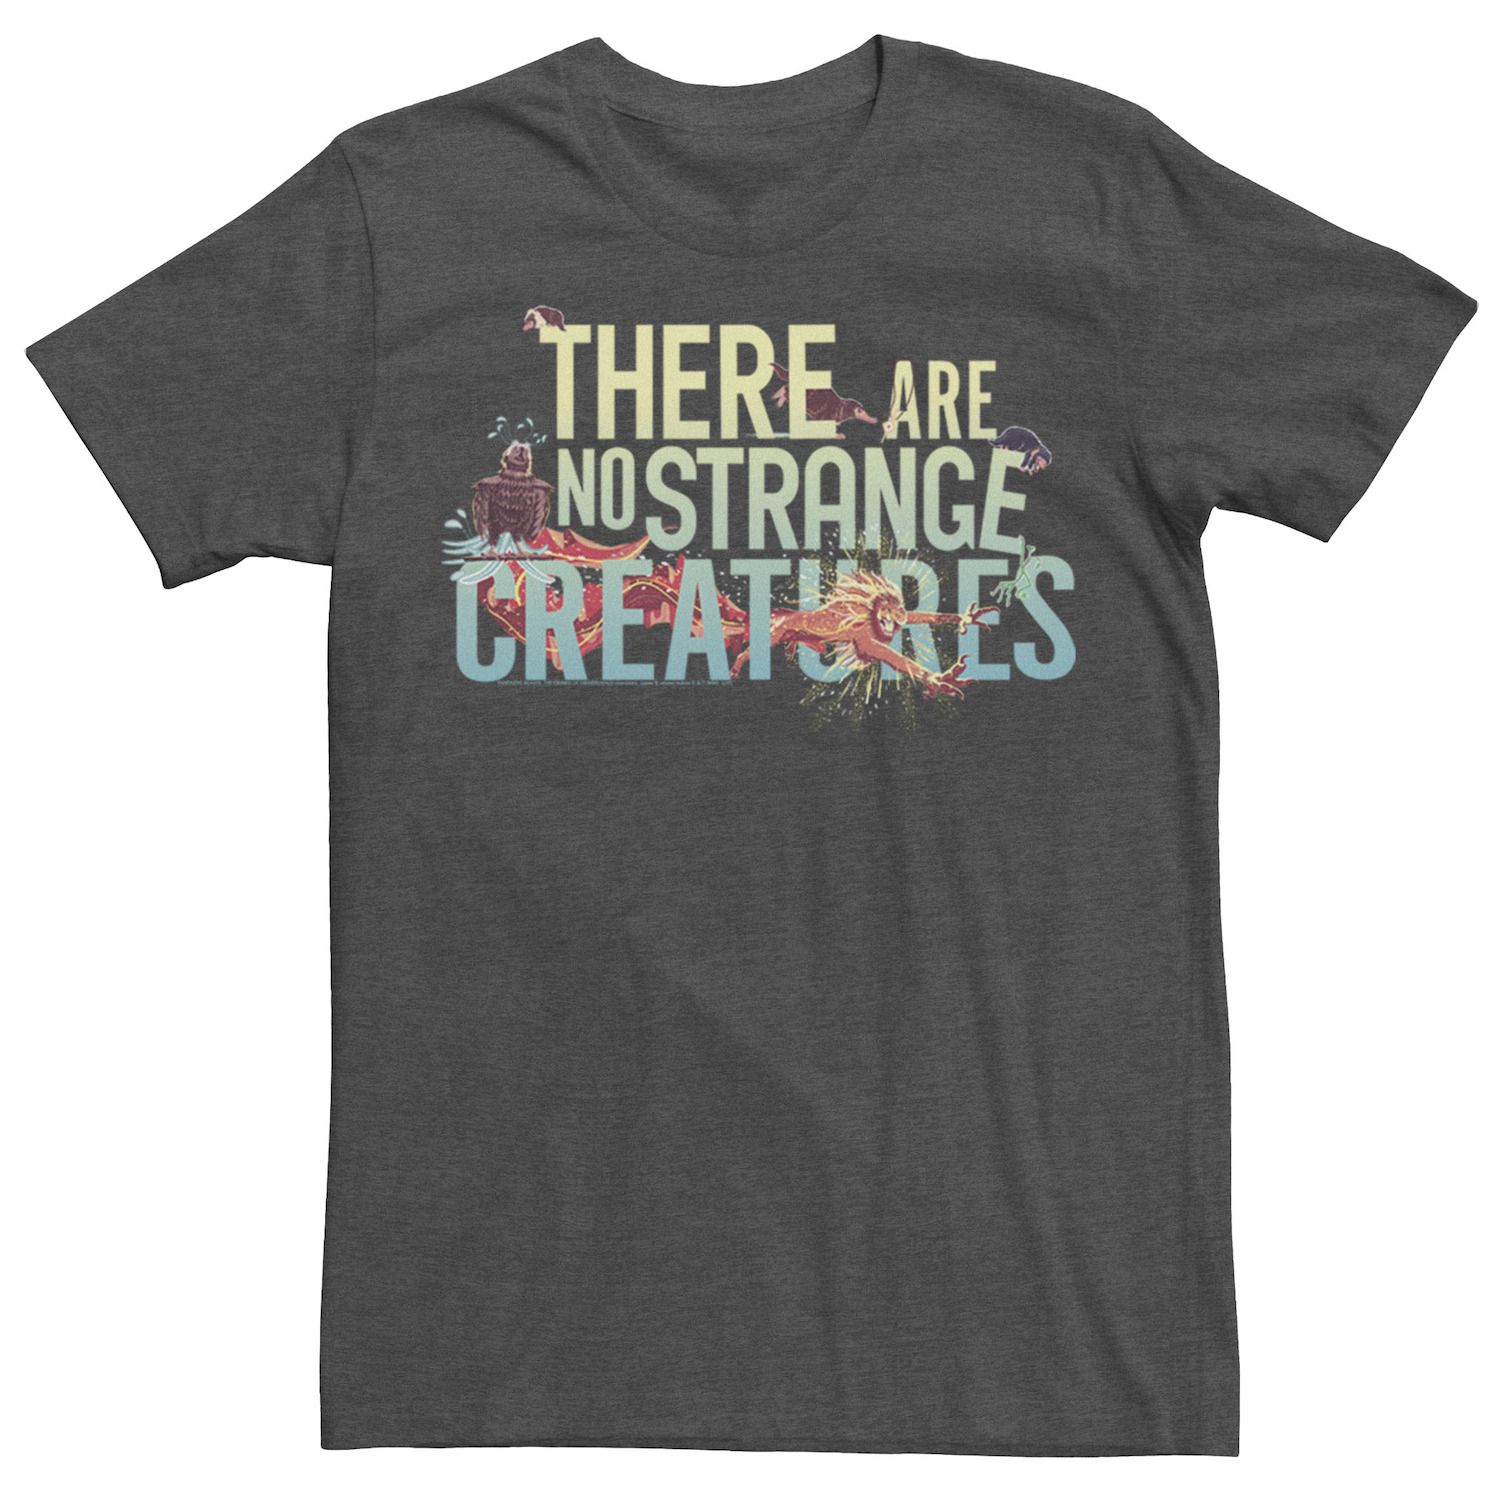 Image for Harry Potter Men's Fantastic Beasts There Are No Strange Creatures Graphic Tee at Kohl's.